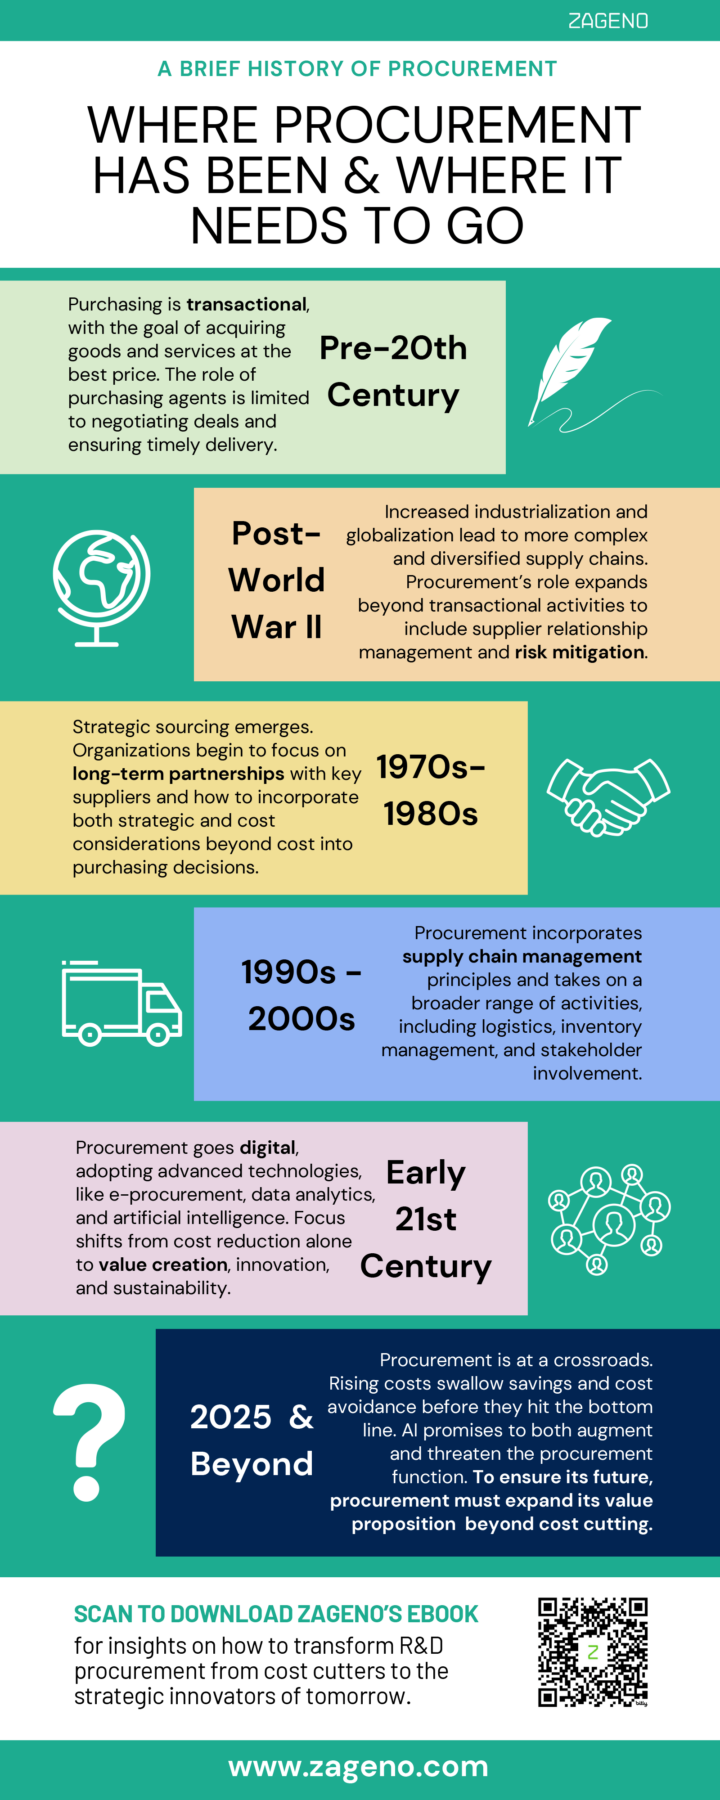 Infographic depicting the history of procurement